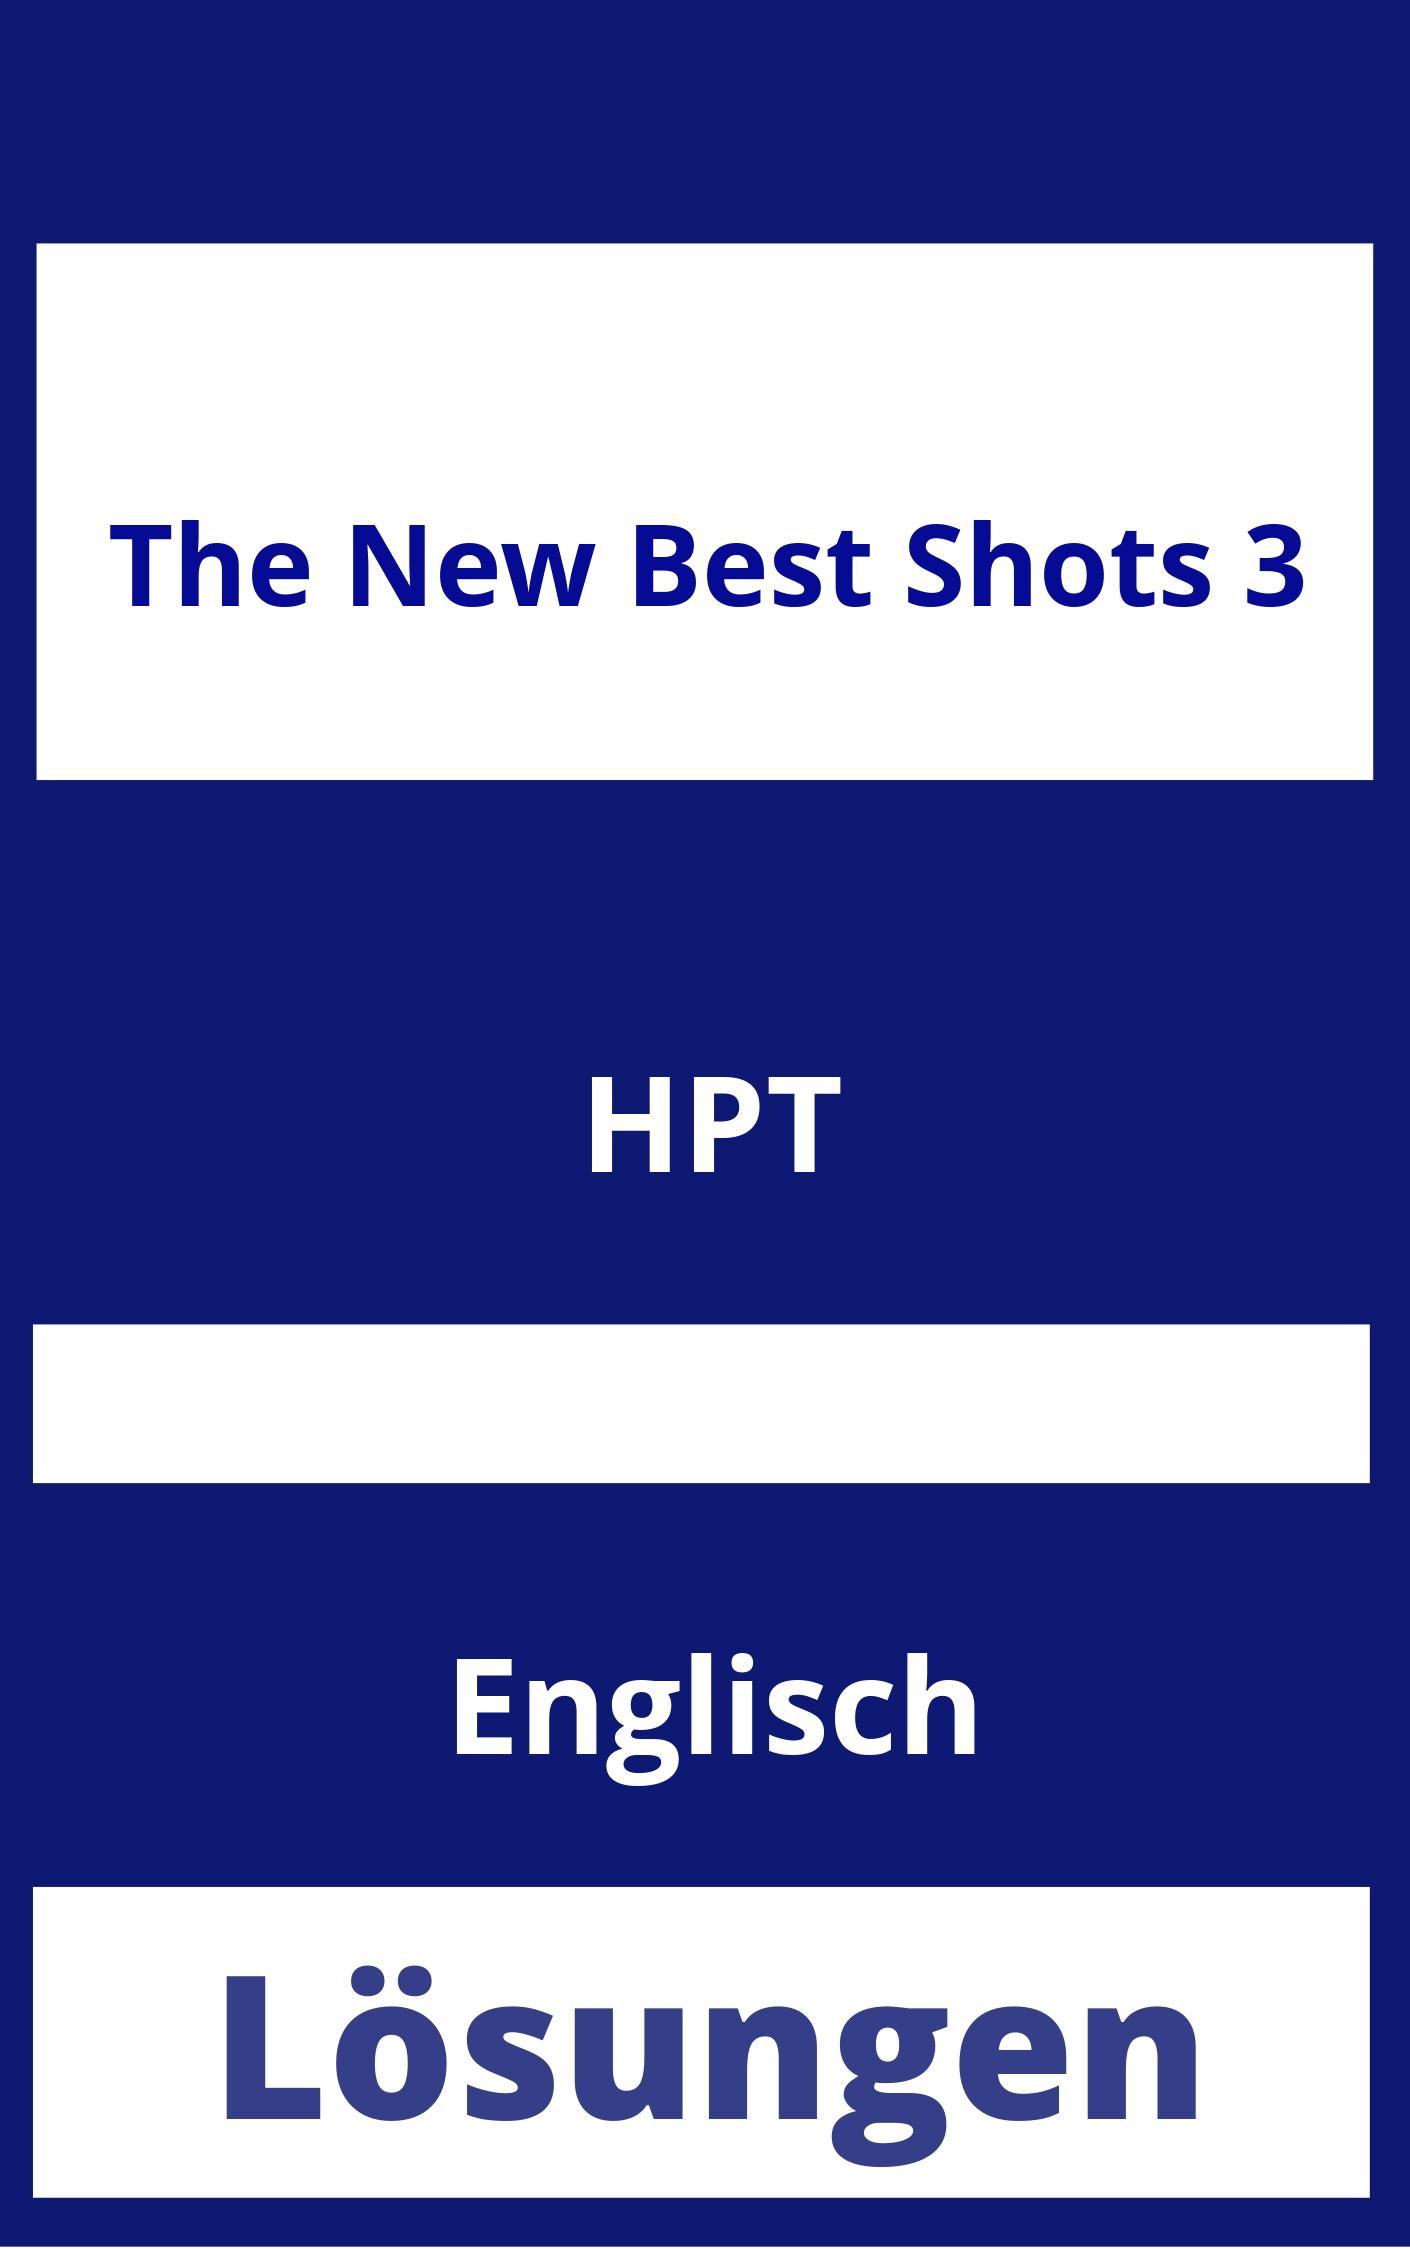 The New Best Shots 3